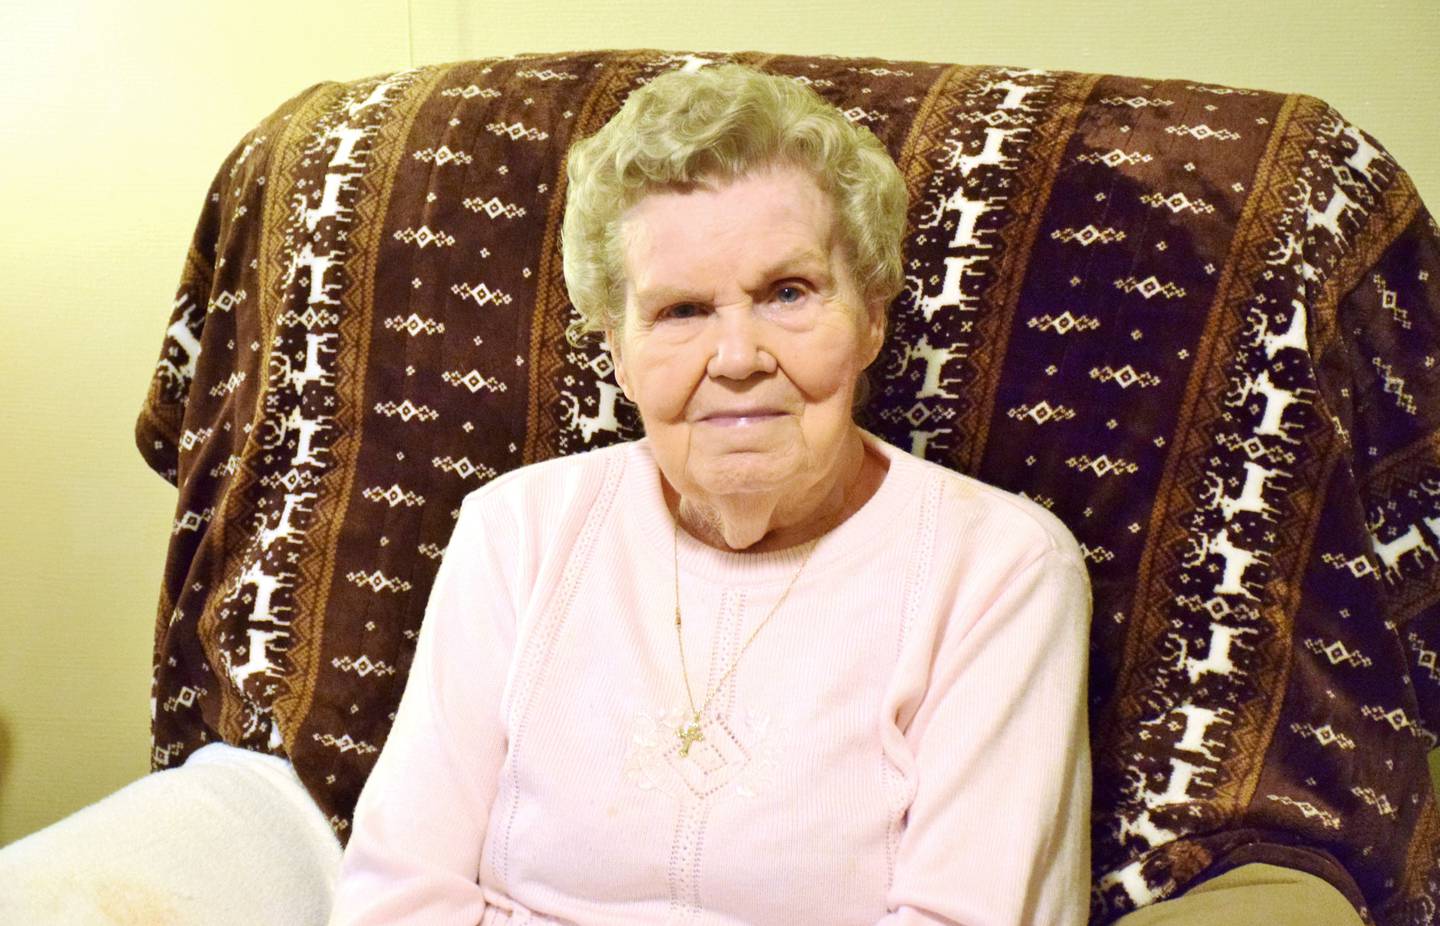 Betty Dombroski is thankful to have moved into Barb City Manor in DeKalb this year, where she has made new friends and enjoys activities and programs.